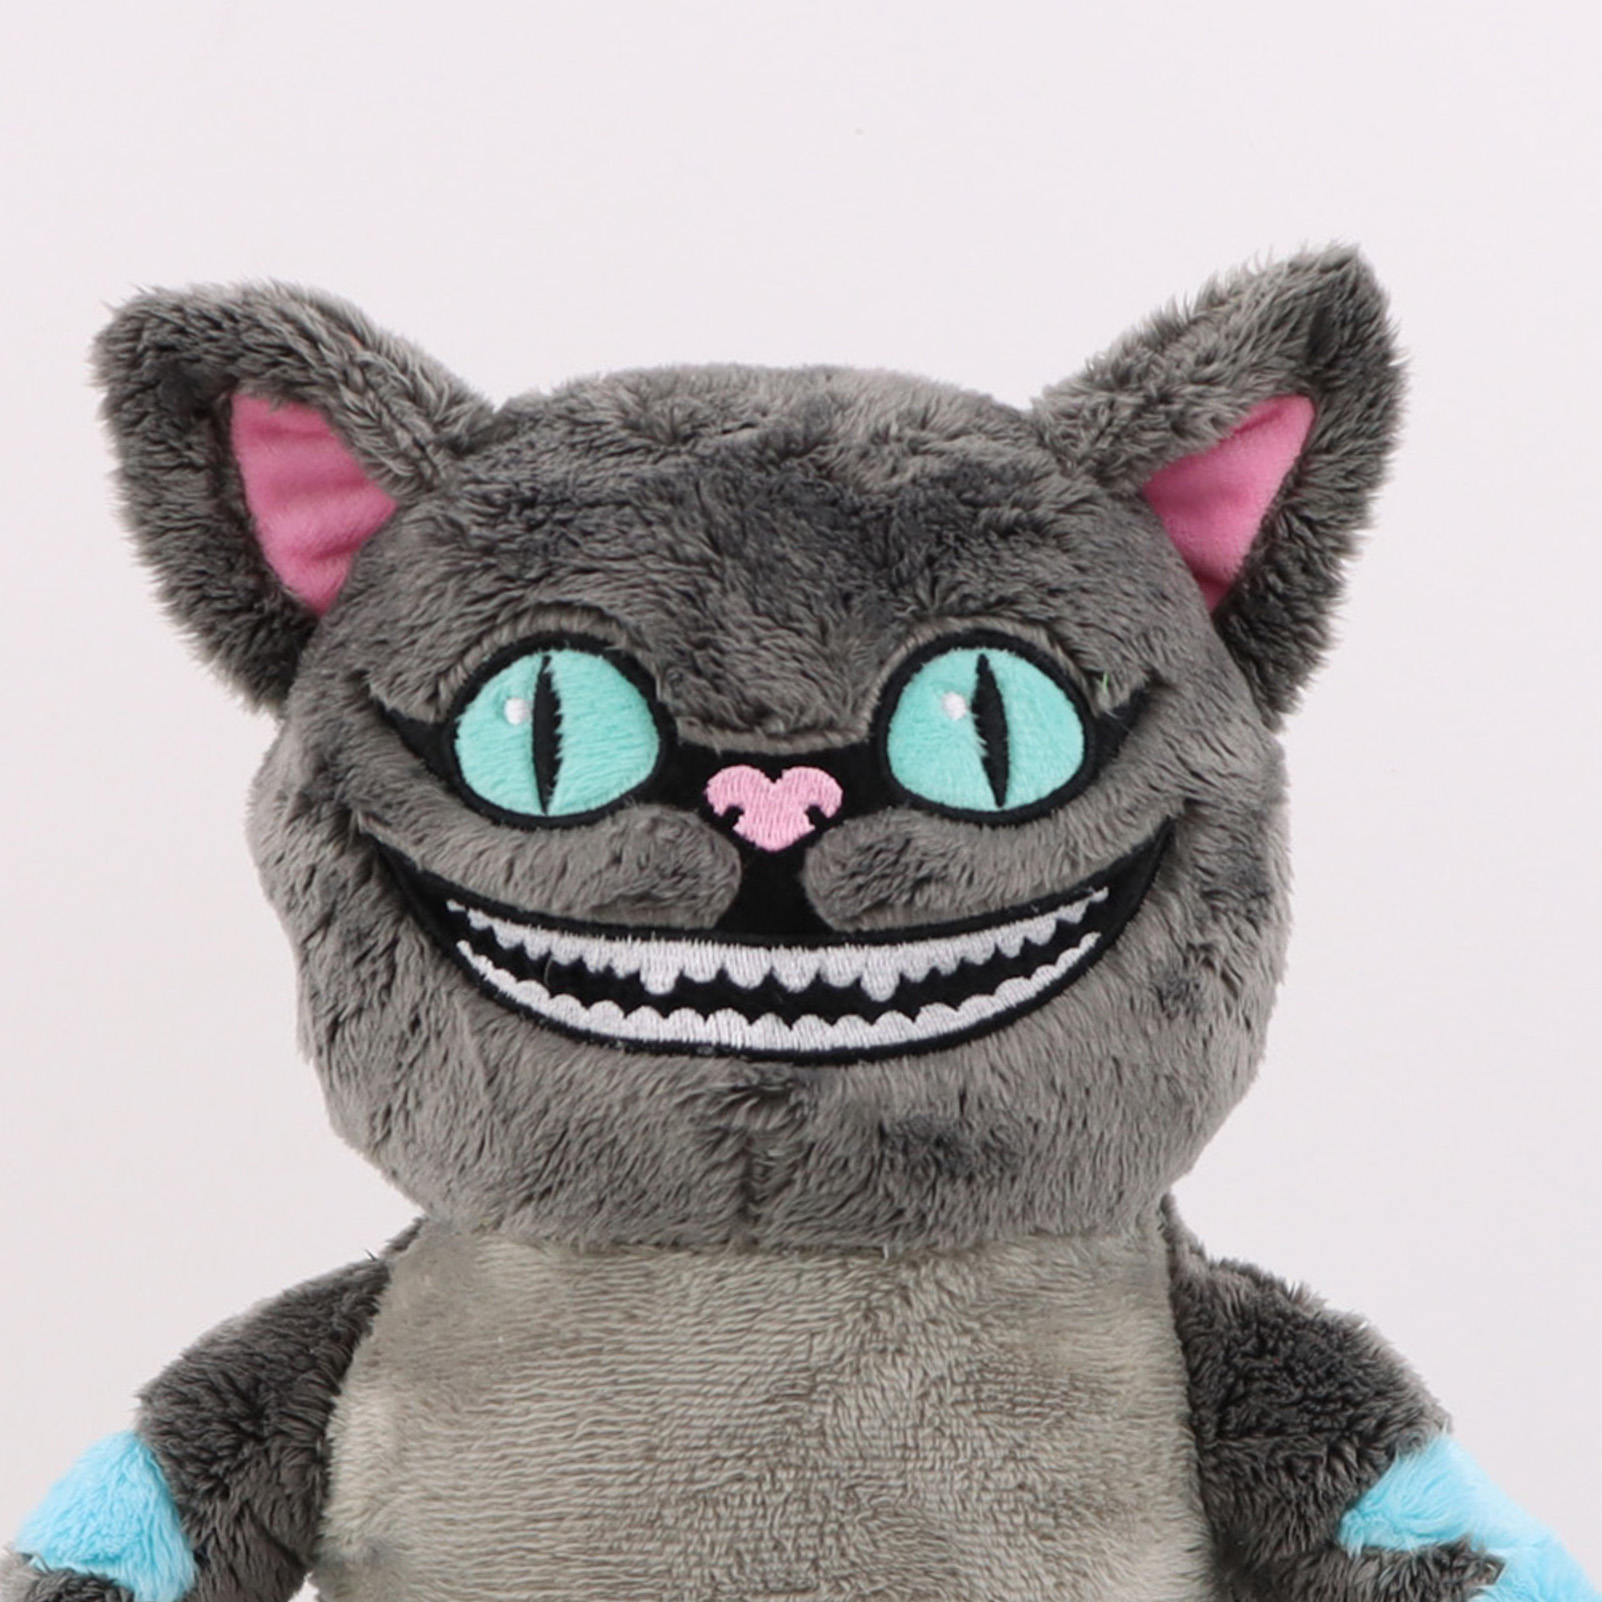 Cheshire Cat Plush and Alice in Wonderland Toy Dolls